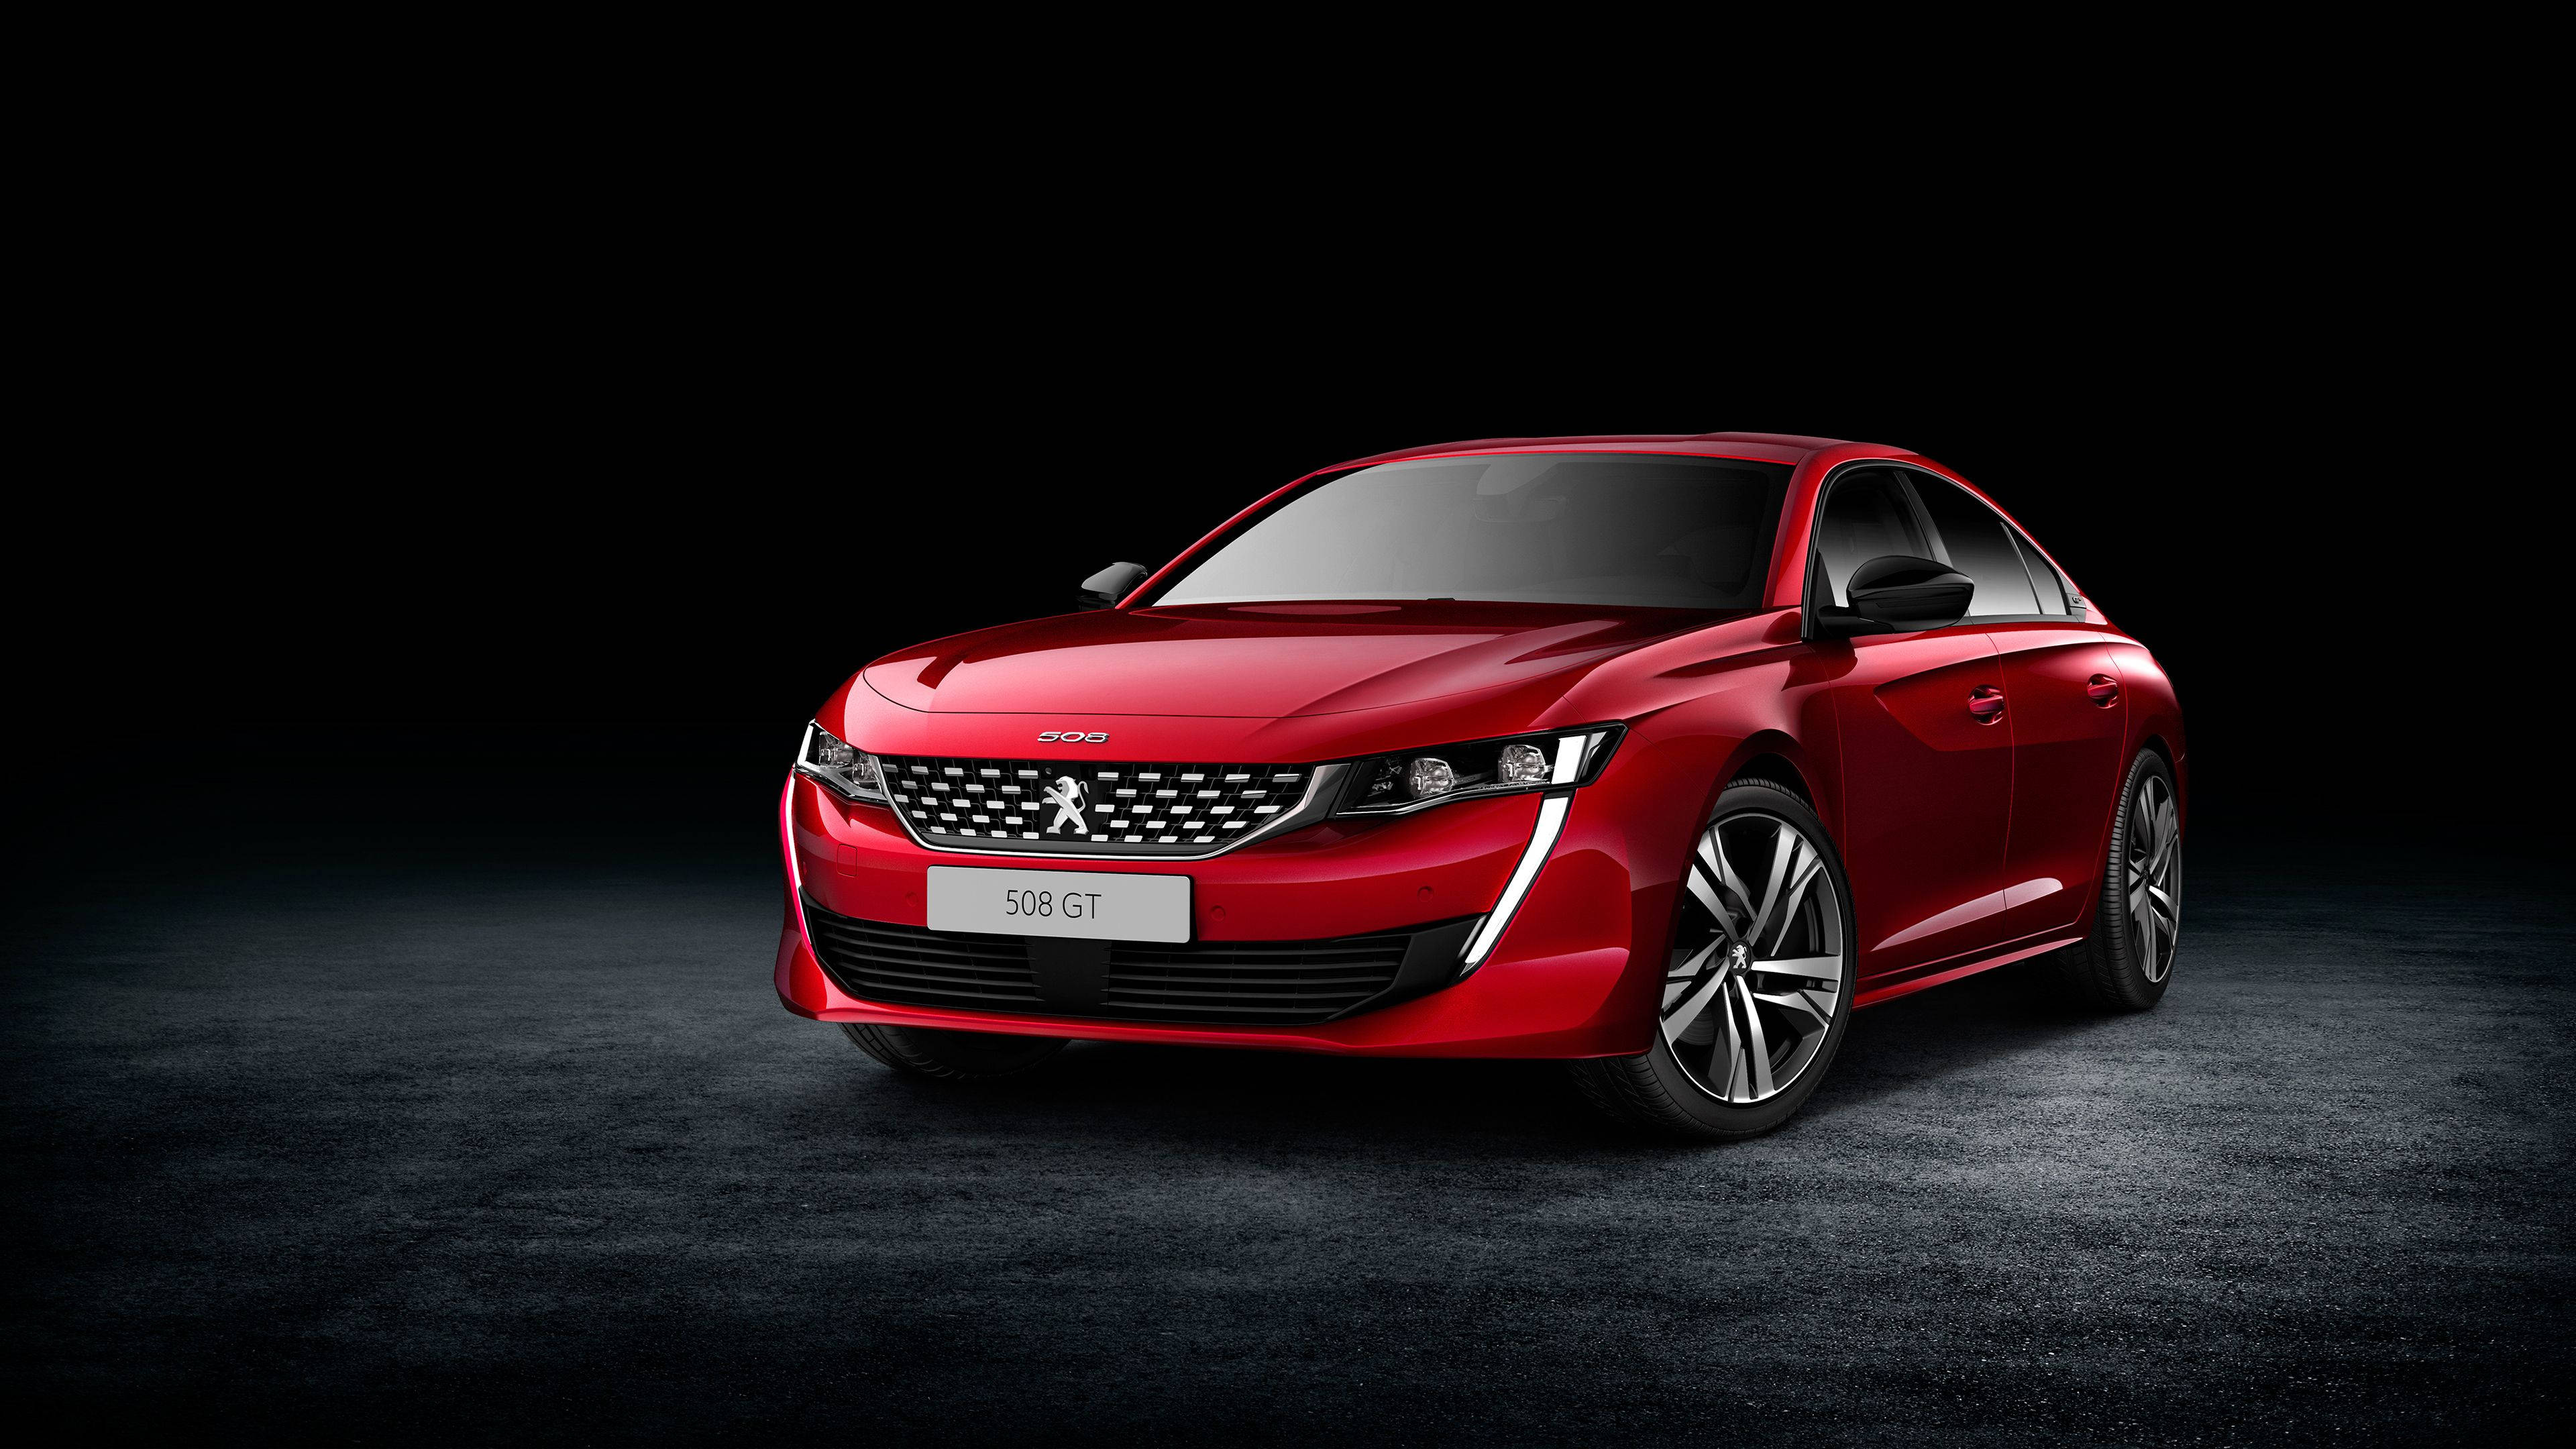 Red Peugeot 508 Gt Background